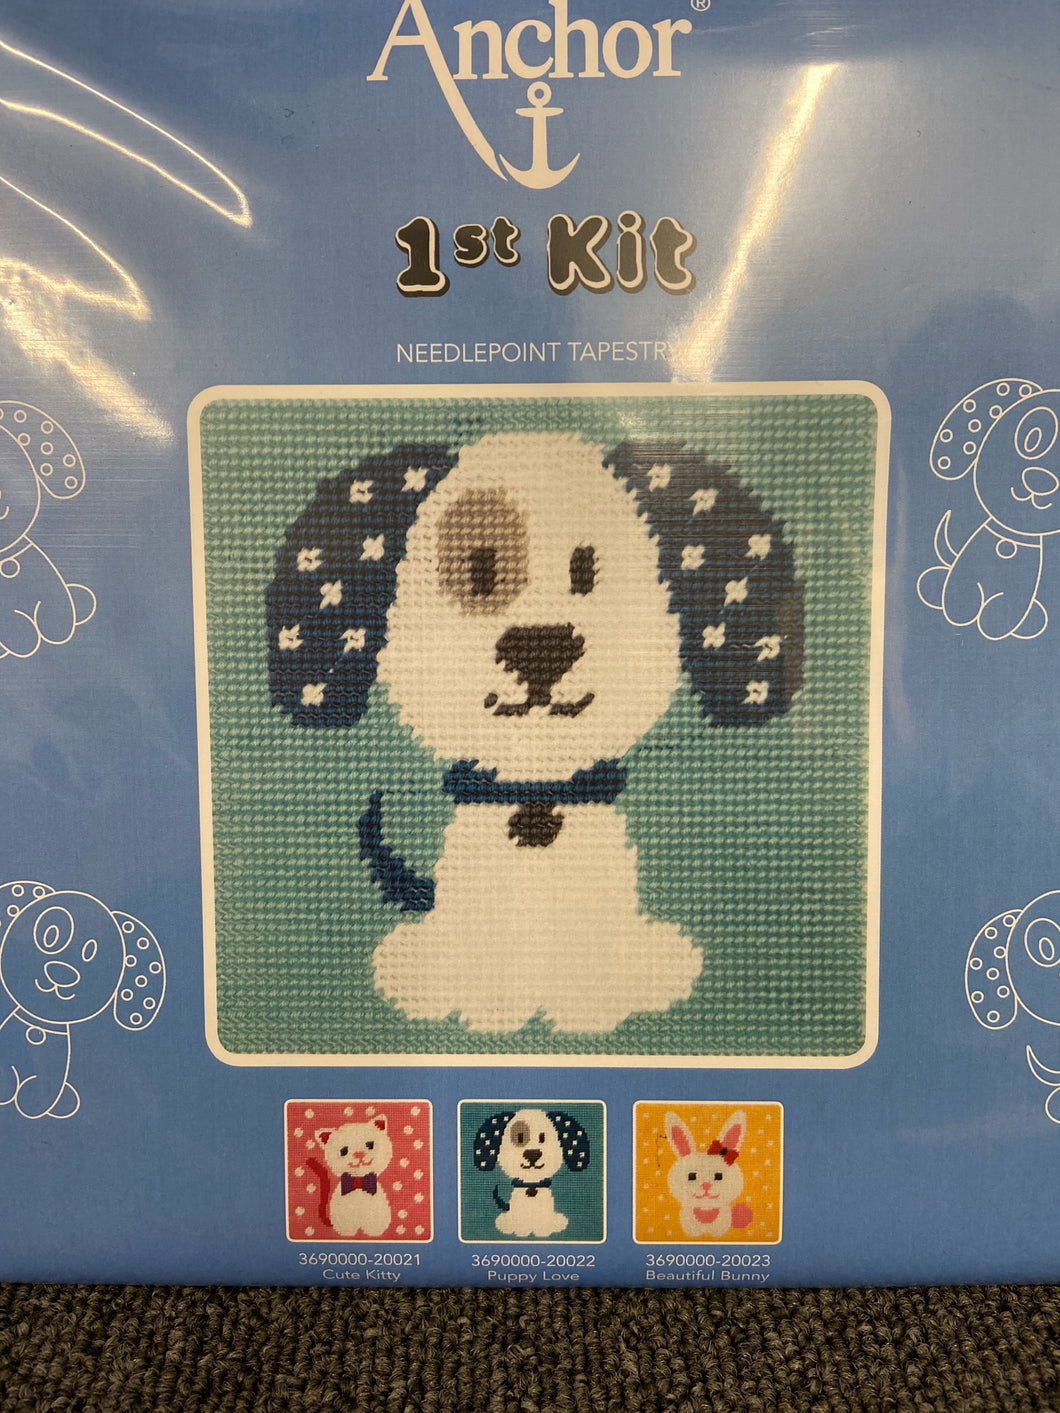 fabric shack sewing sew tapestry needlepoint kits kit first 1st childs kids puppy love 3690000-20022